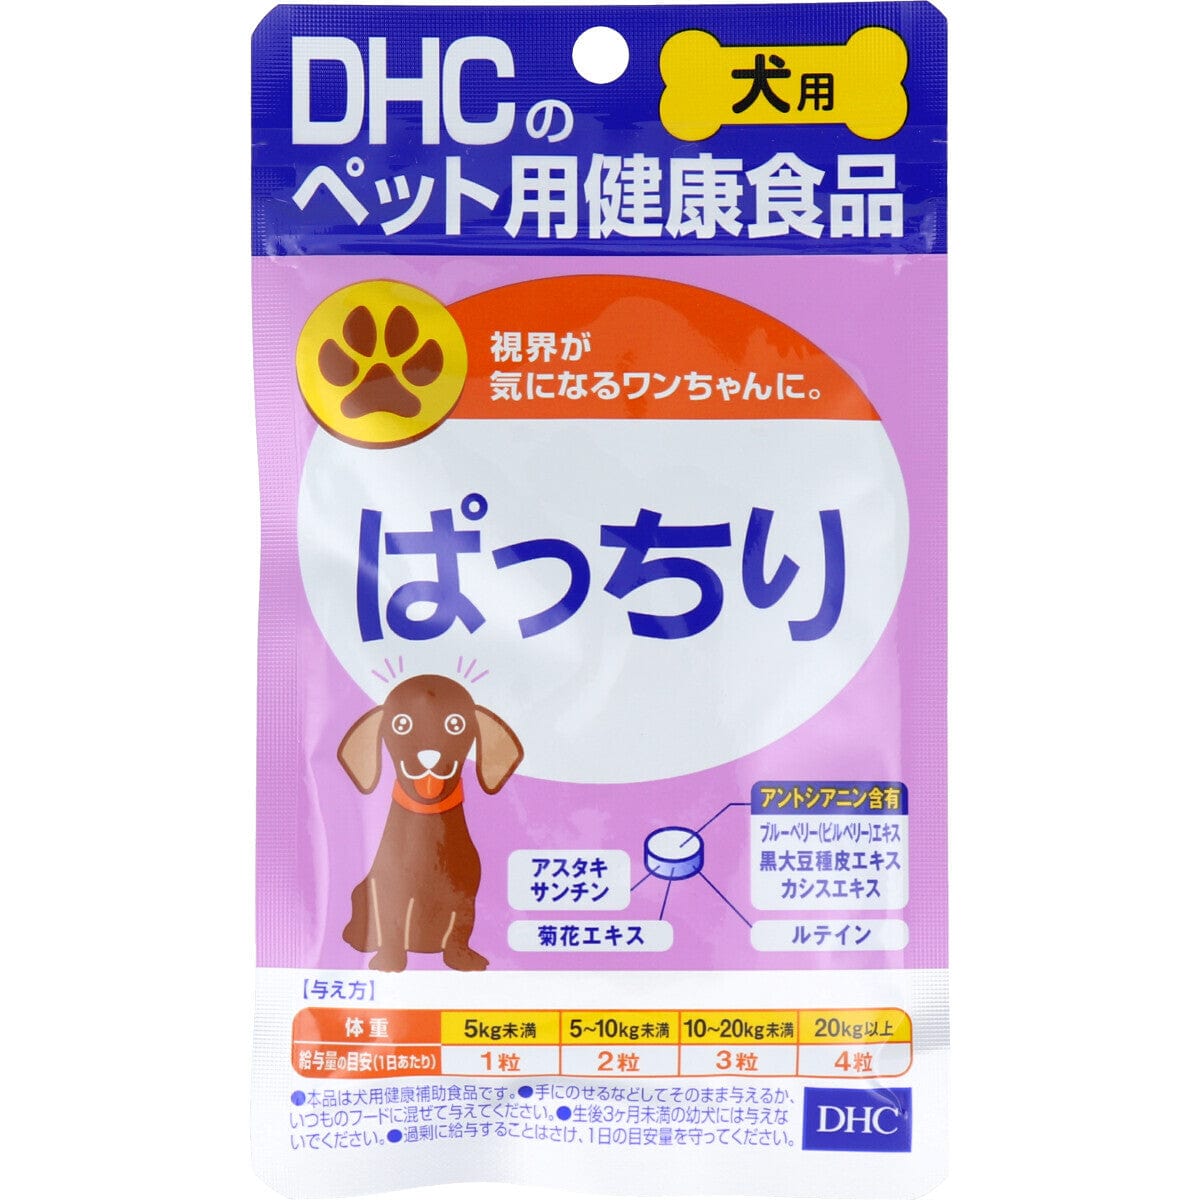 DHC - Bright Eyes Health Food Supplement for Pet Dogs Pacchiri (60 Tablets) -  Pet Dog Supplements  Durio.sg